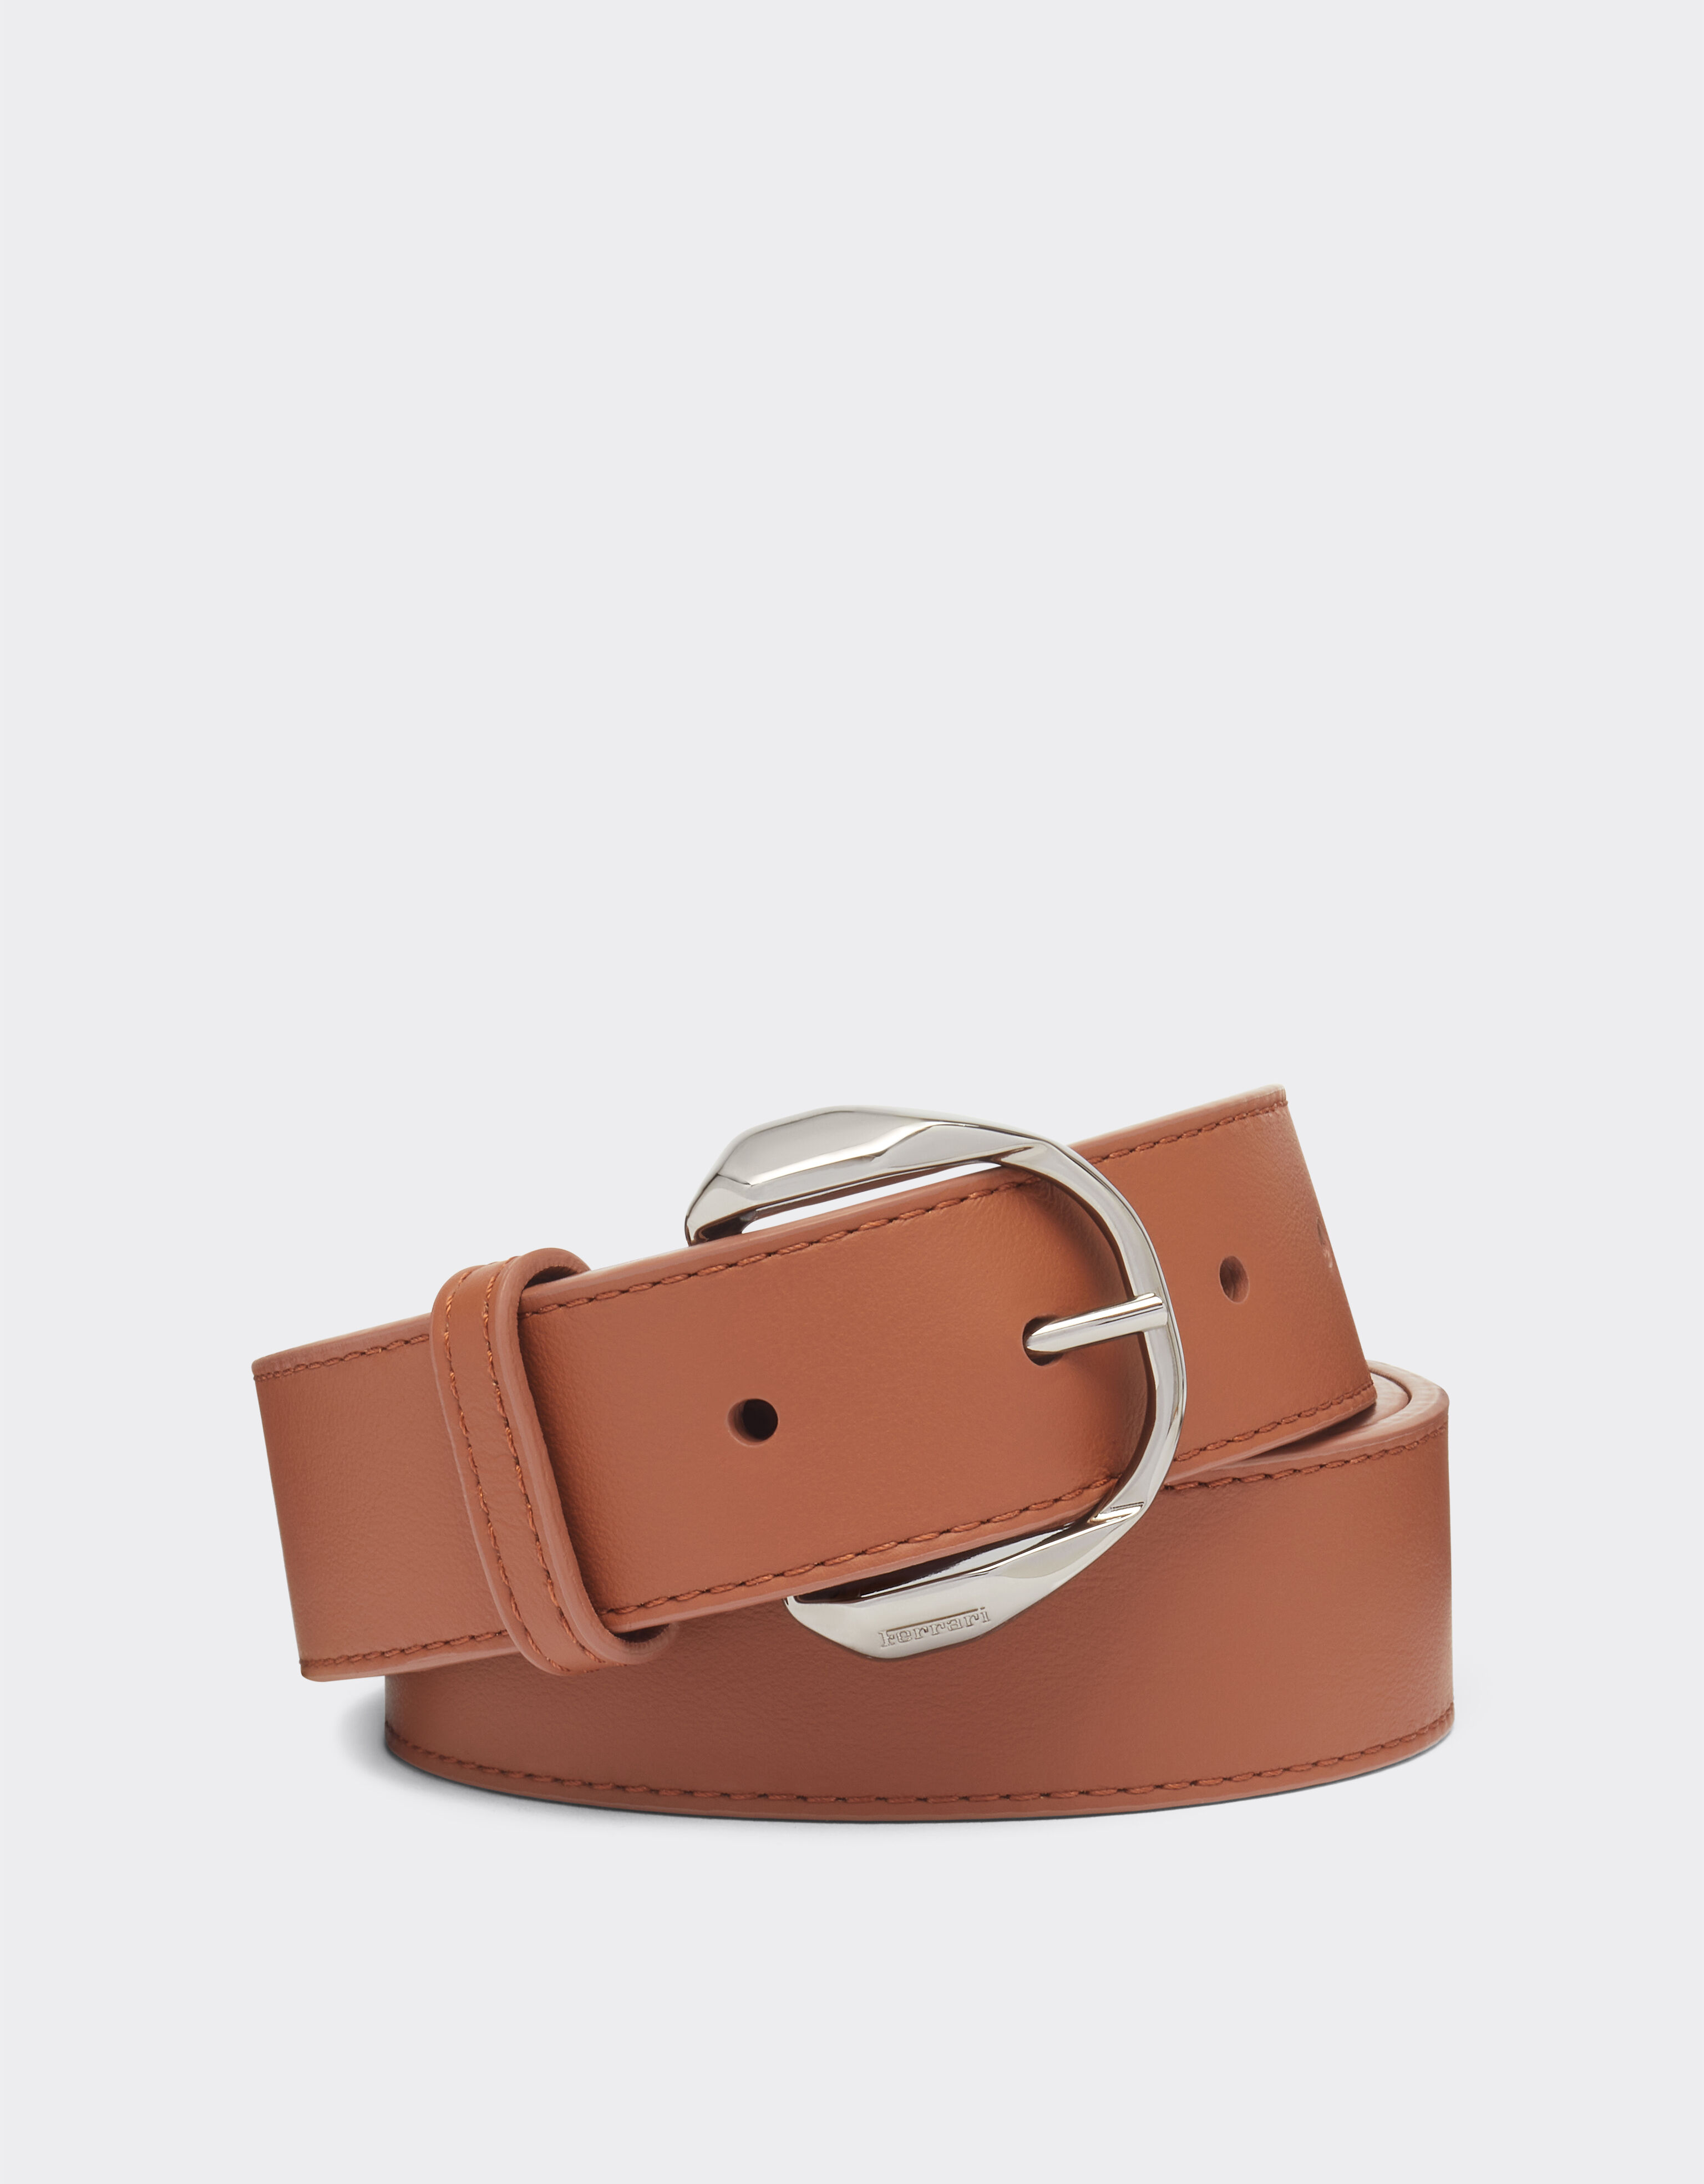 ${brand} Leather belt with Prancing Horse detail ${colorDescription} ${masterID}